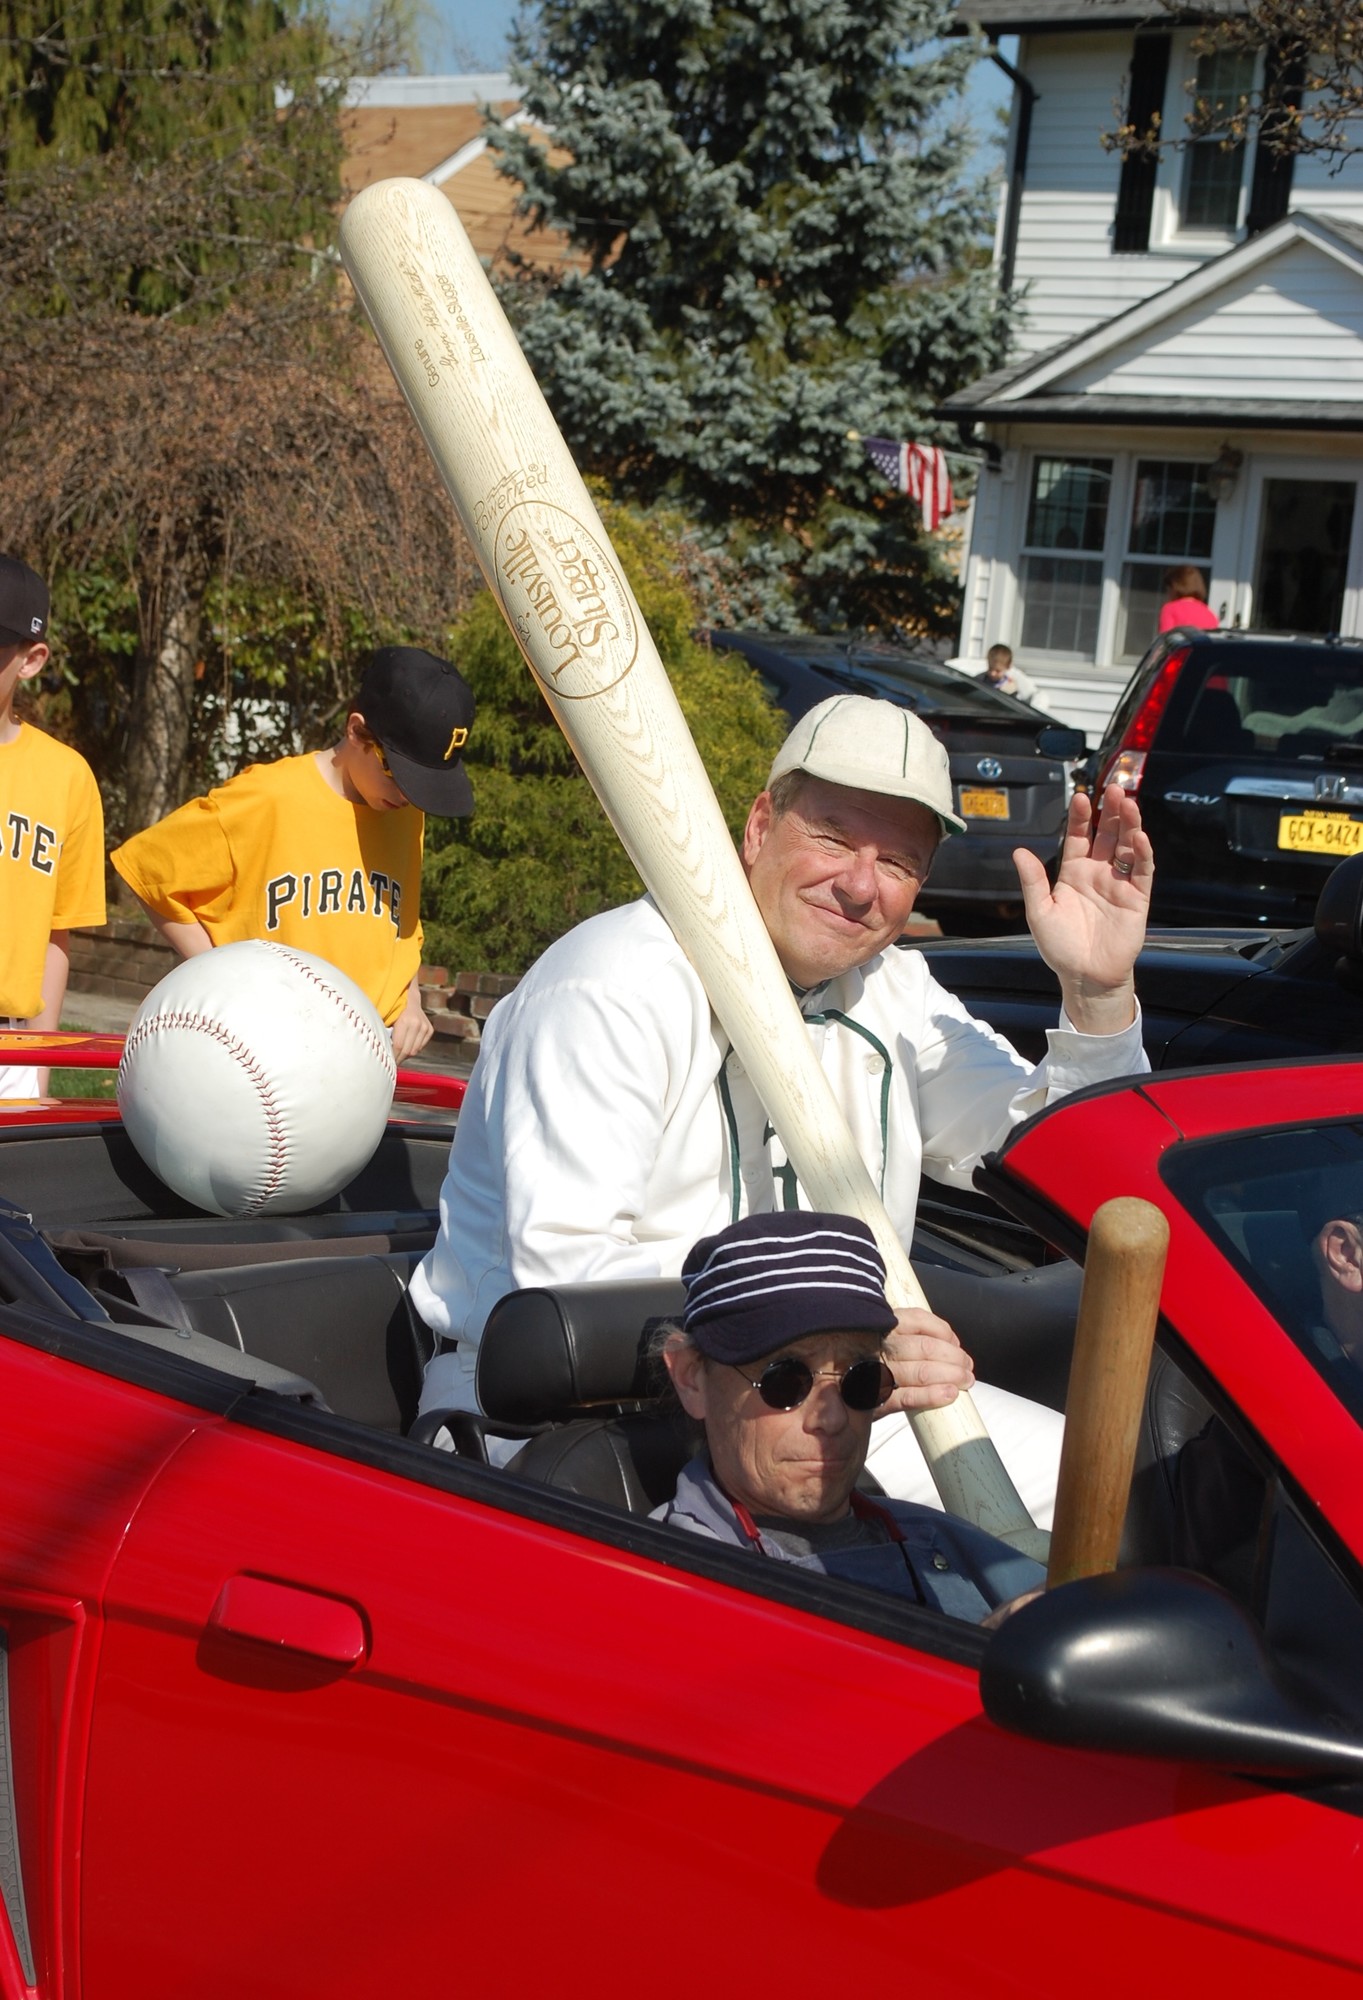 Ed Pecinka, of Wantagh, a member of the vintage Mutuals baseball team at the Old Bethpage Village Restoration, waved to the crowd on Demott Street.